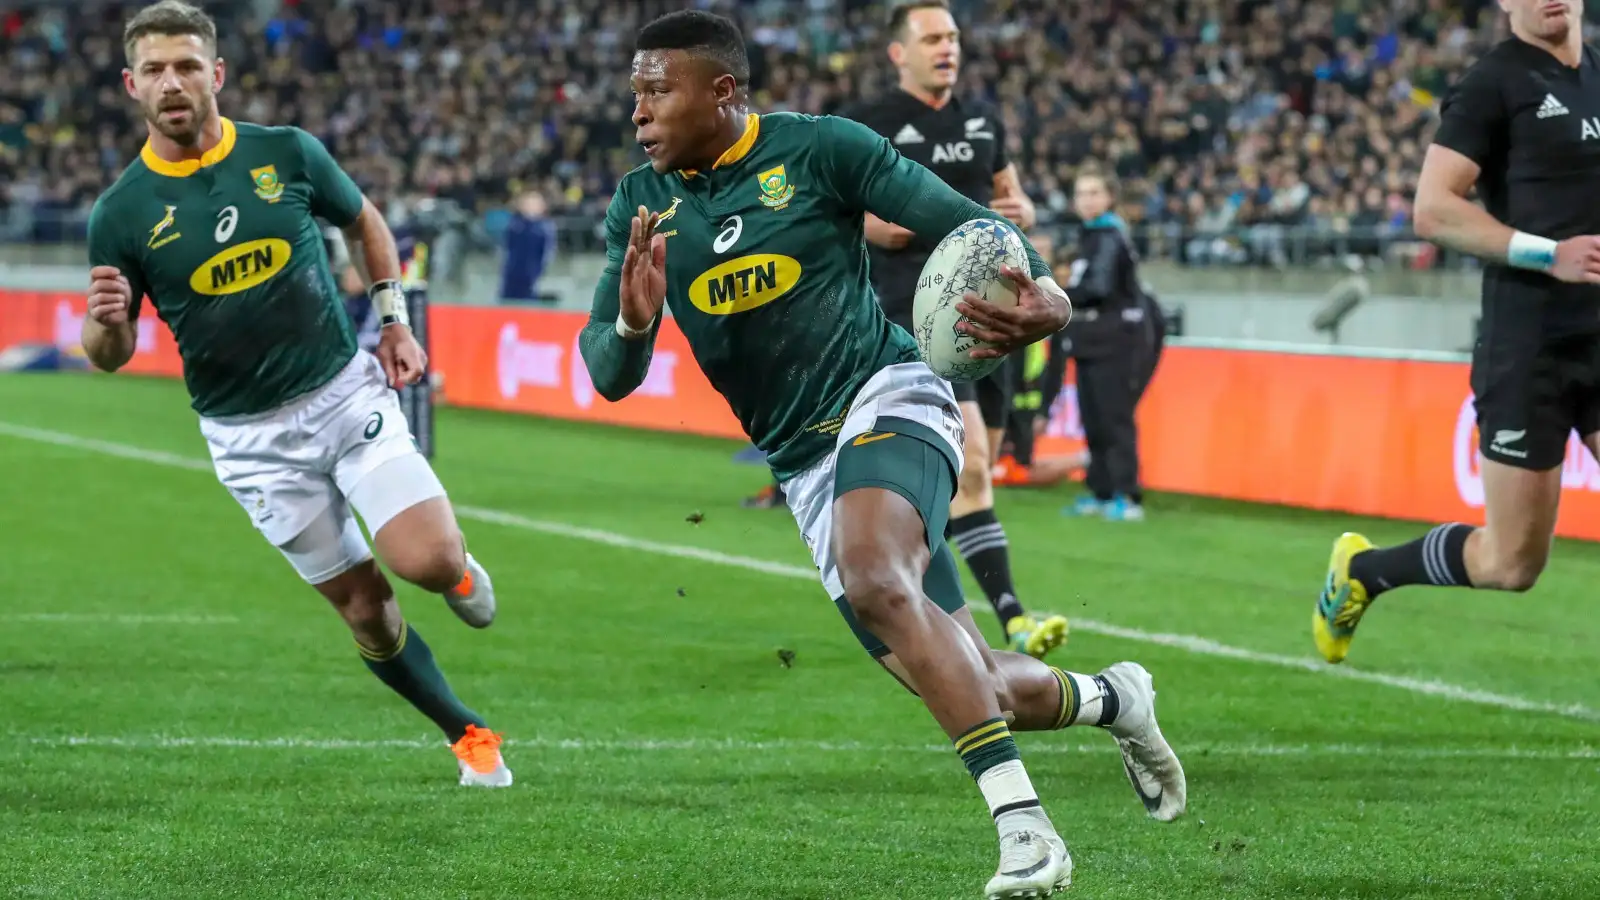 Aphiwe Dyantyi scoring a try for South Africa against New Zealand.